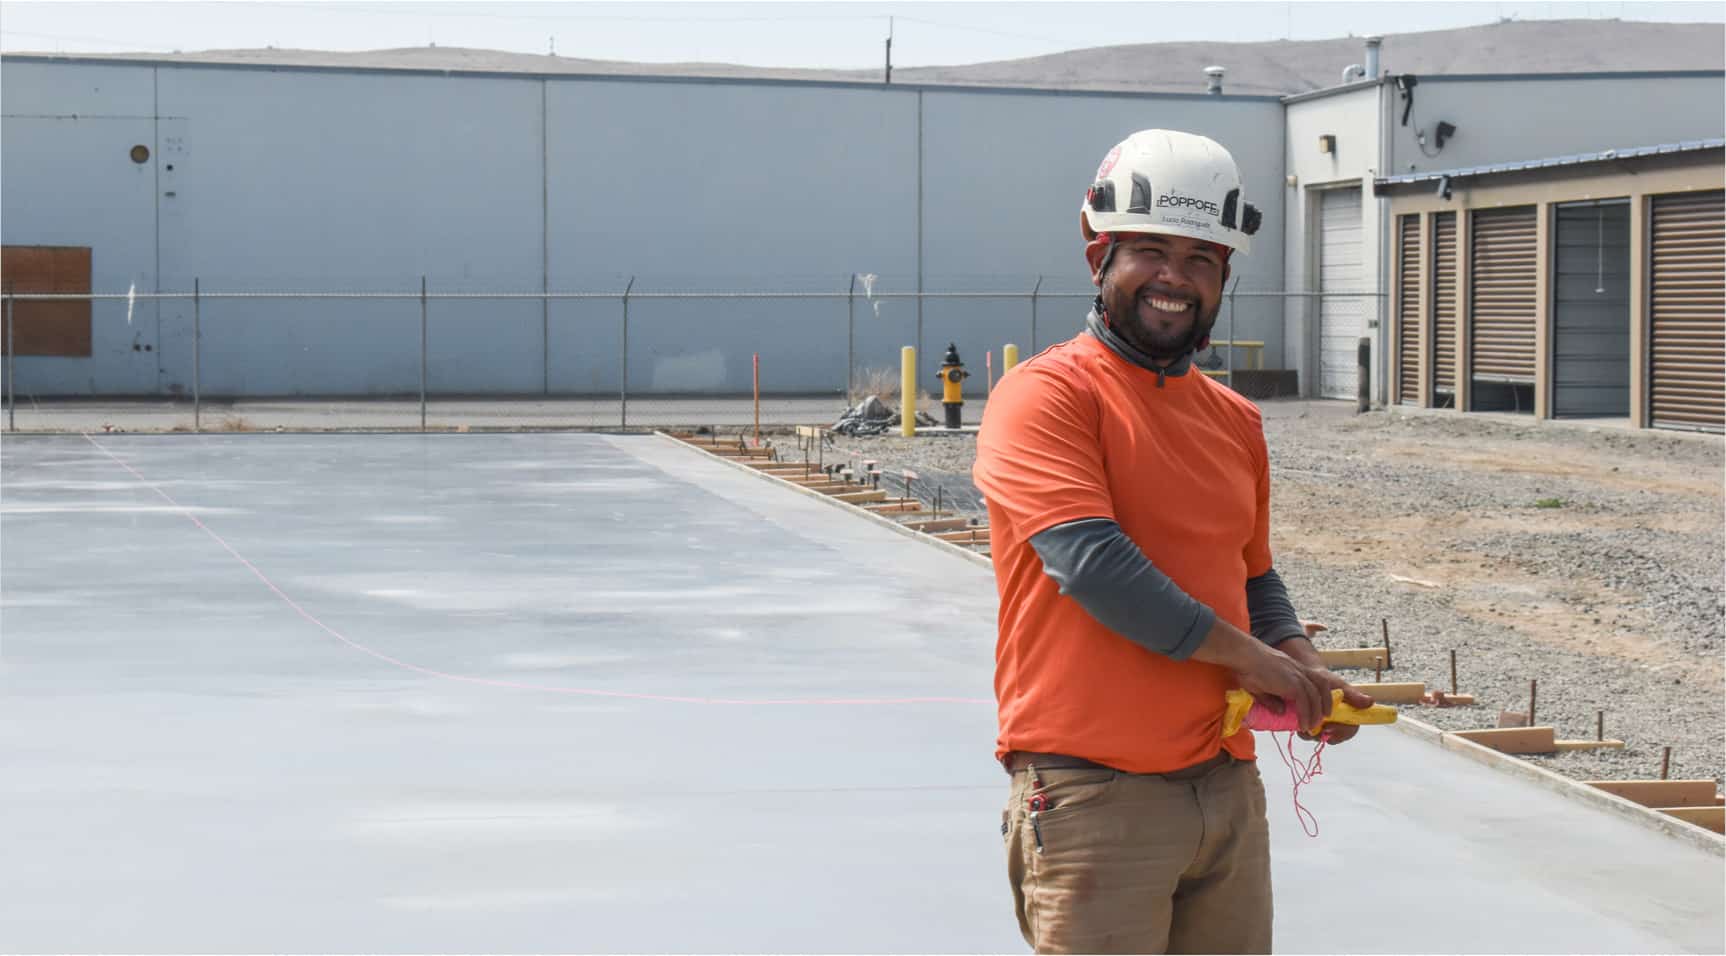 Smiling Poppoff employee in front of concrete slab